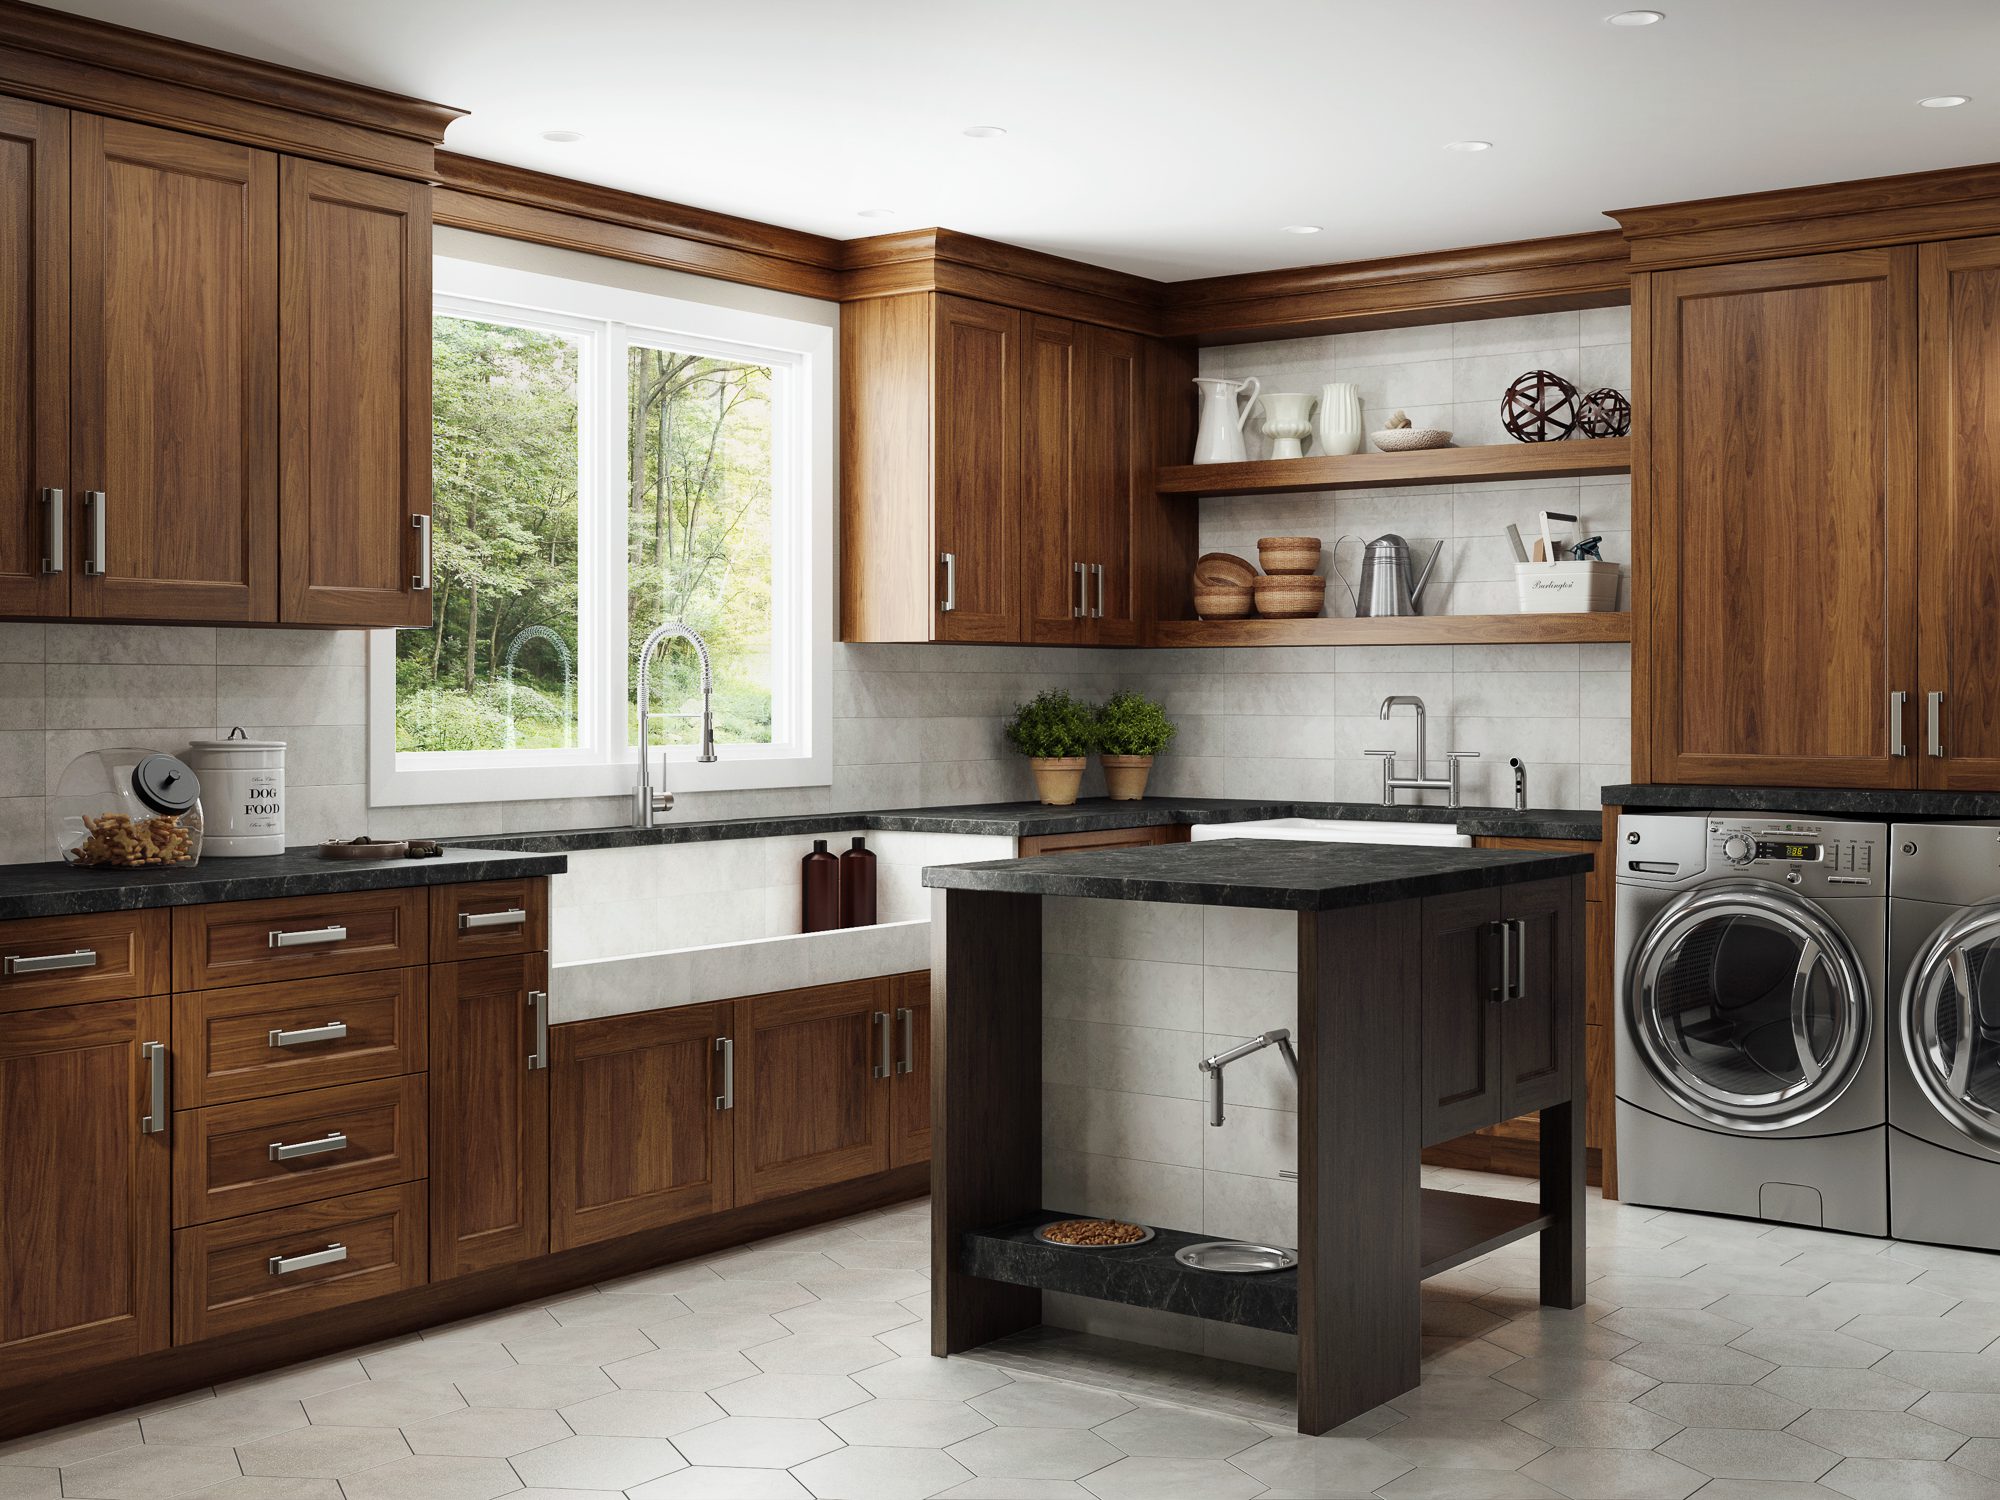 Featured image for “Your Go-To for the Best Bridgewood Cabinets”